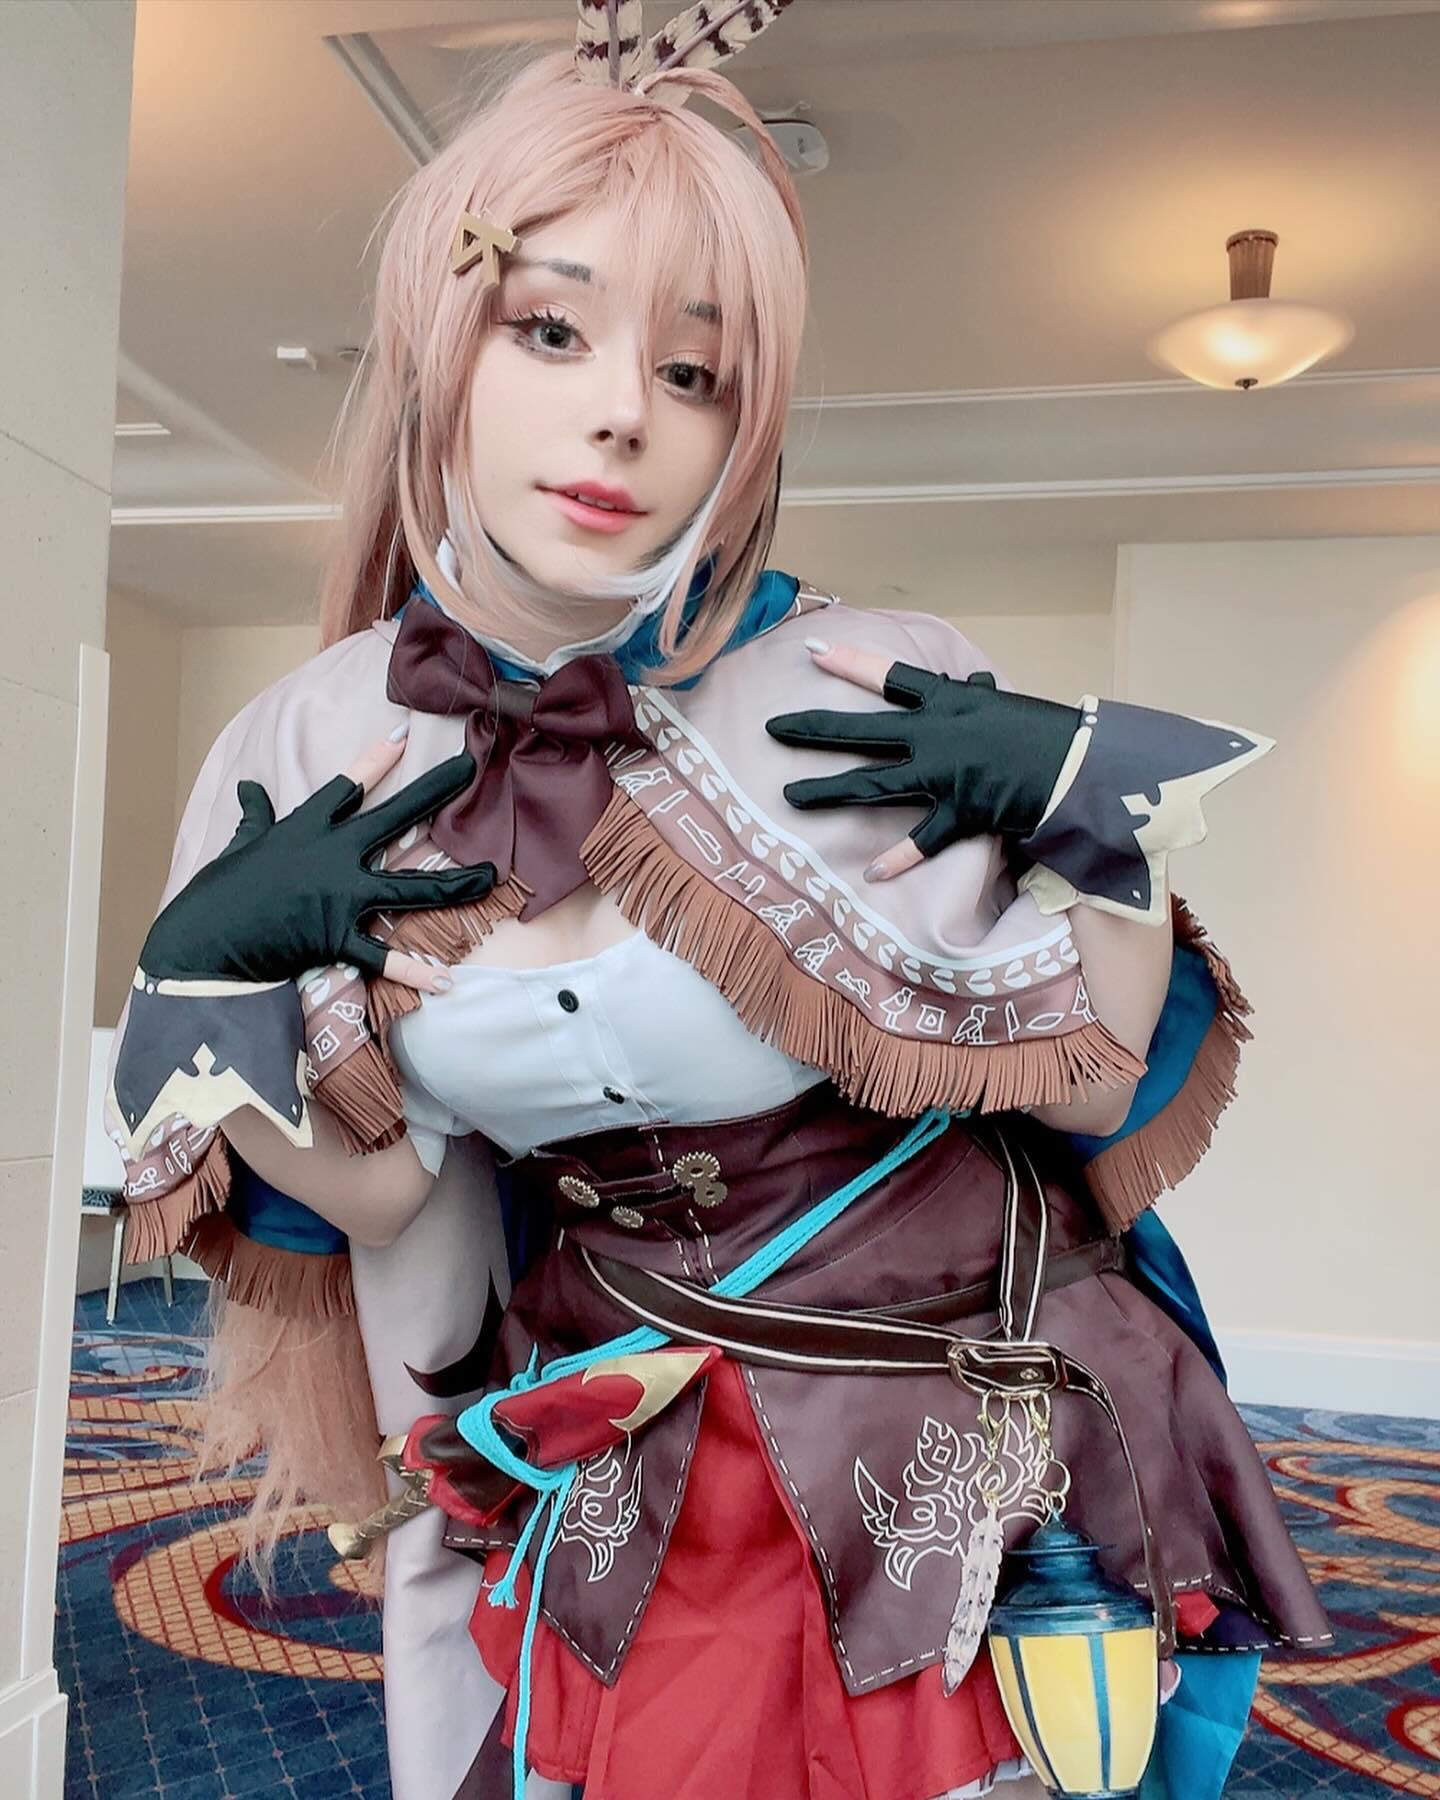 Vtuber supremacy! I am birb now. I’m so happy with how my Nanashi Mumei cosplay turned out! And now that Katsucon is finally over I feel so motivated and energized to make content!  #katsucon #cosplaygirl #vtubers #hololive #cosplay